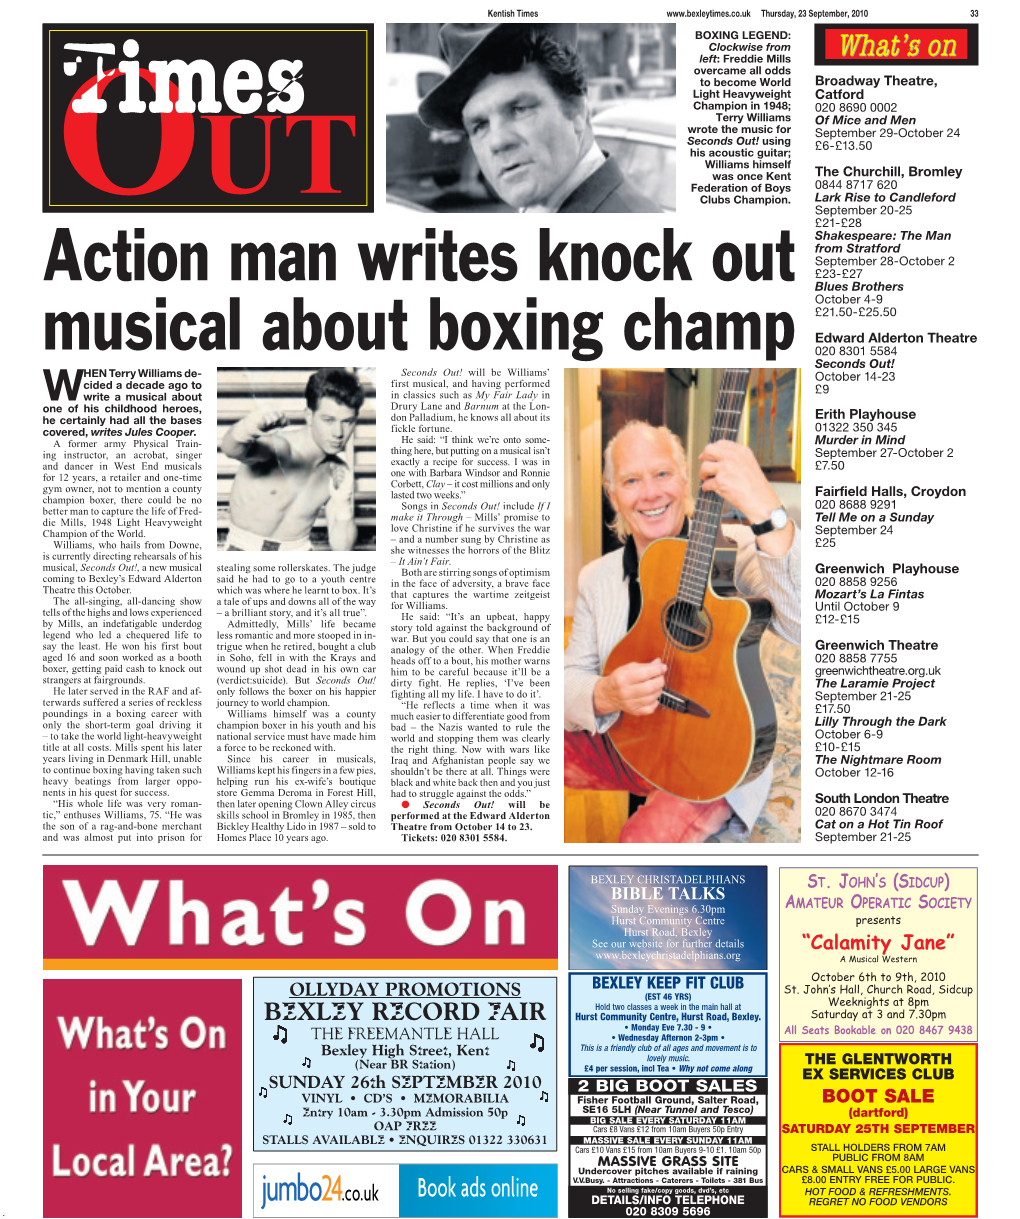 Action Man Writes Knock out Musical About Boxing Champ